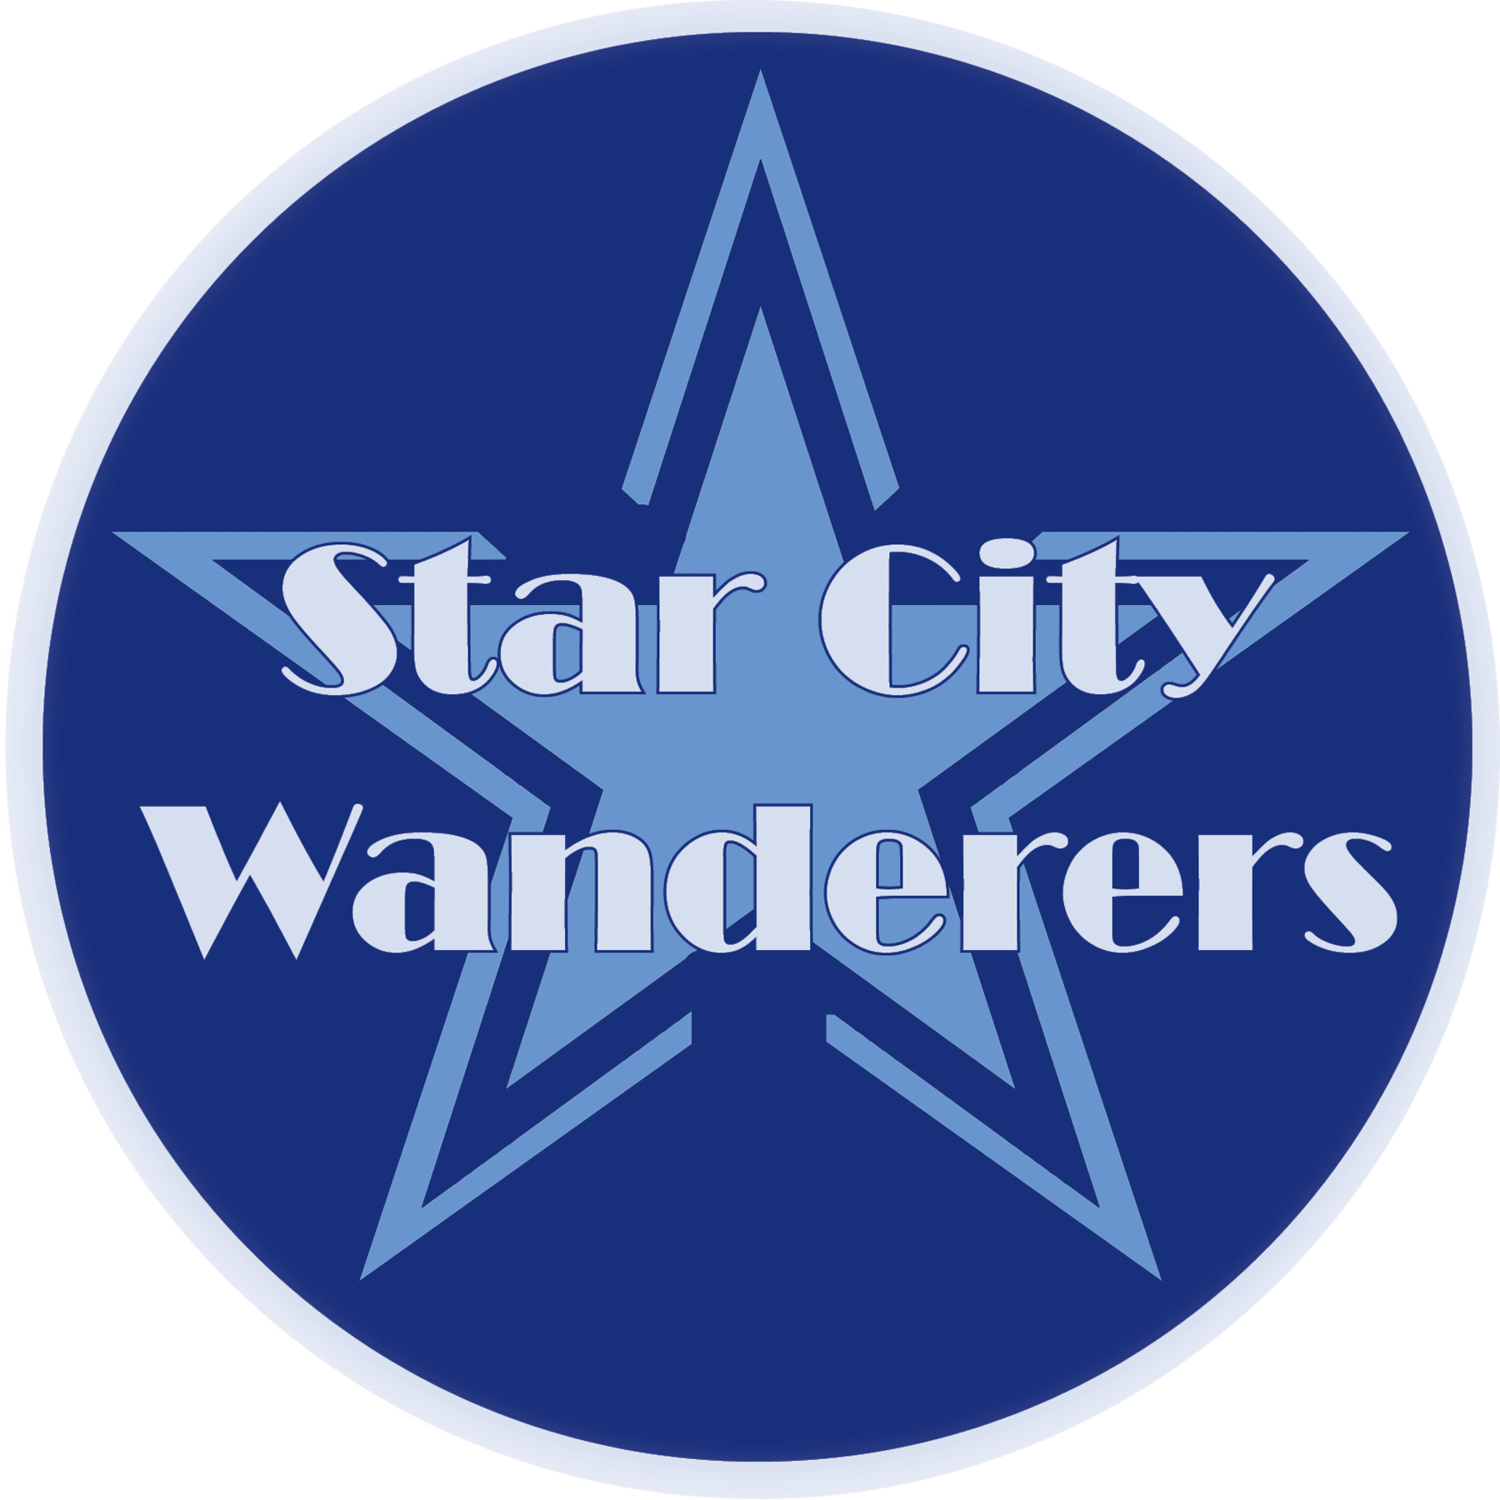 Star City Wanderers: A Guide to Your Adventurous Life